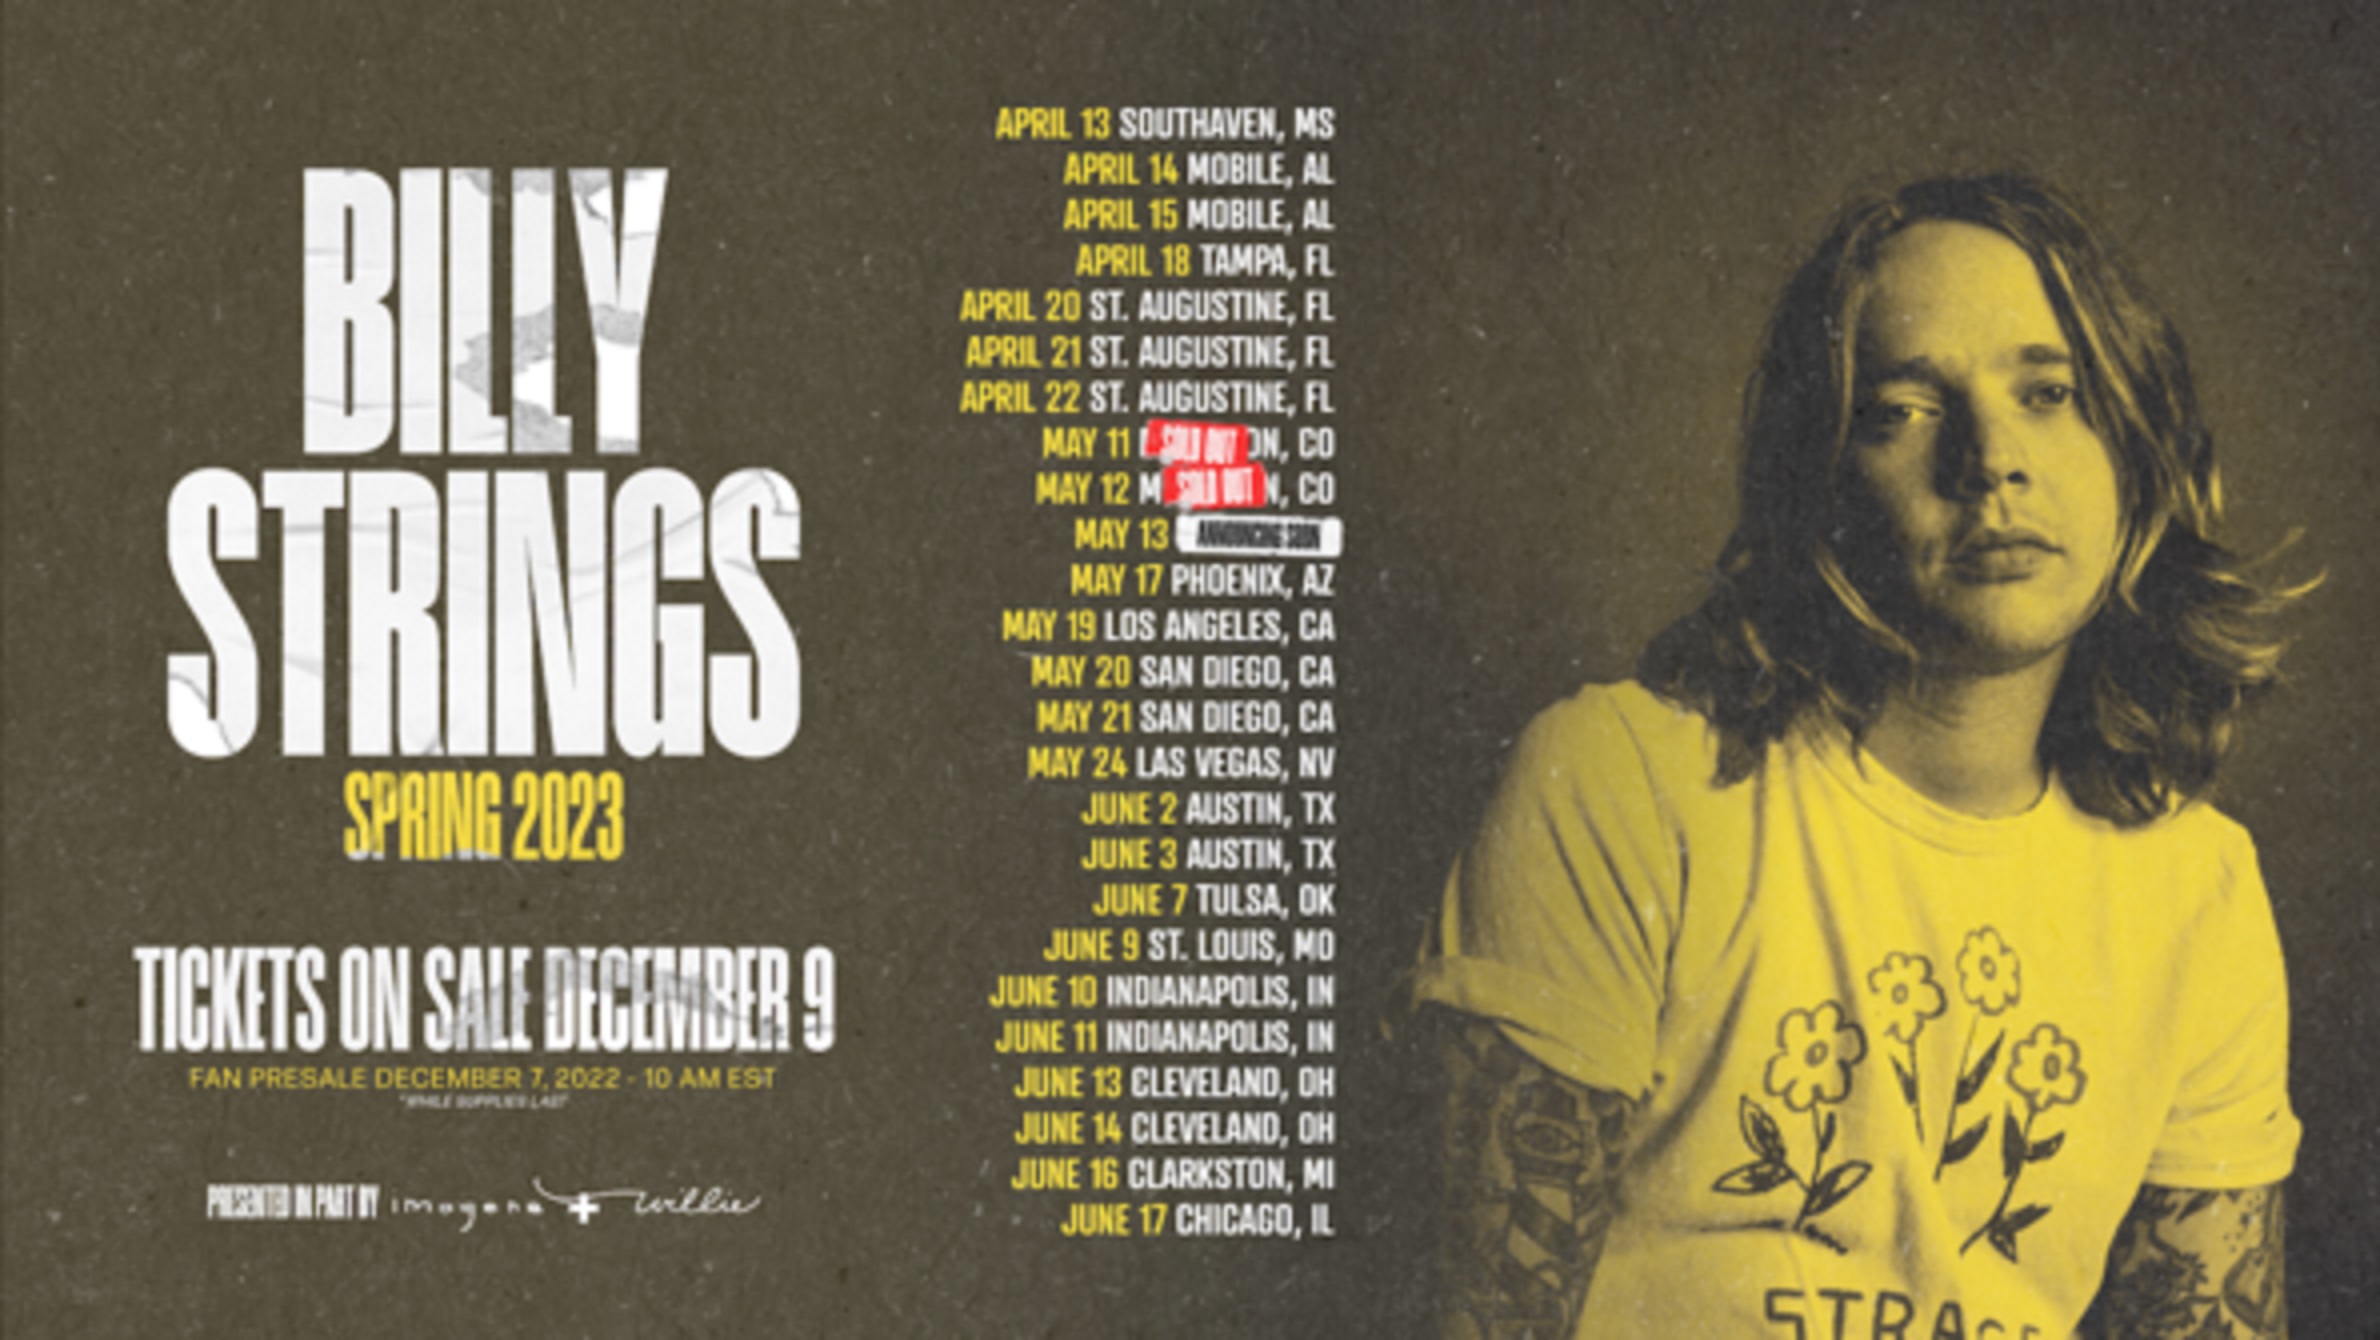 Billy Strings confirms 2023 spring tour including eight headline arena shows